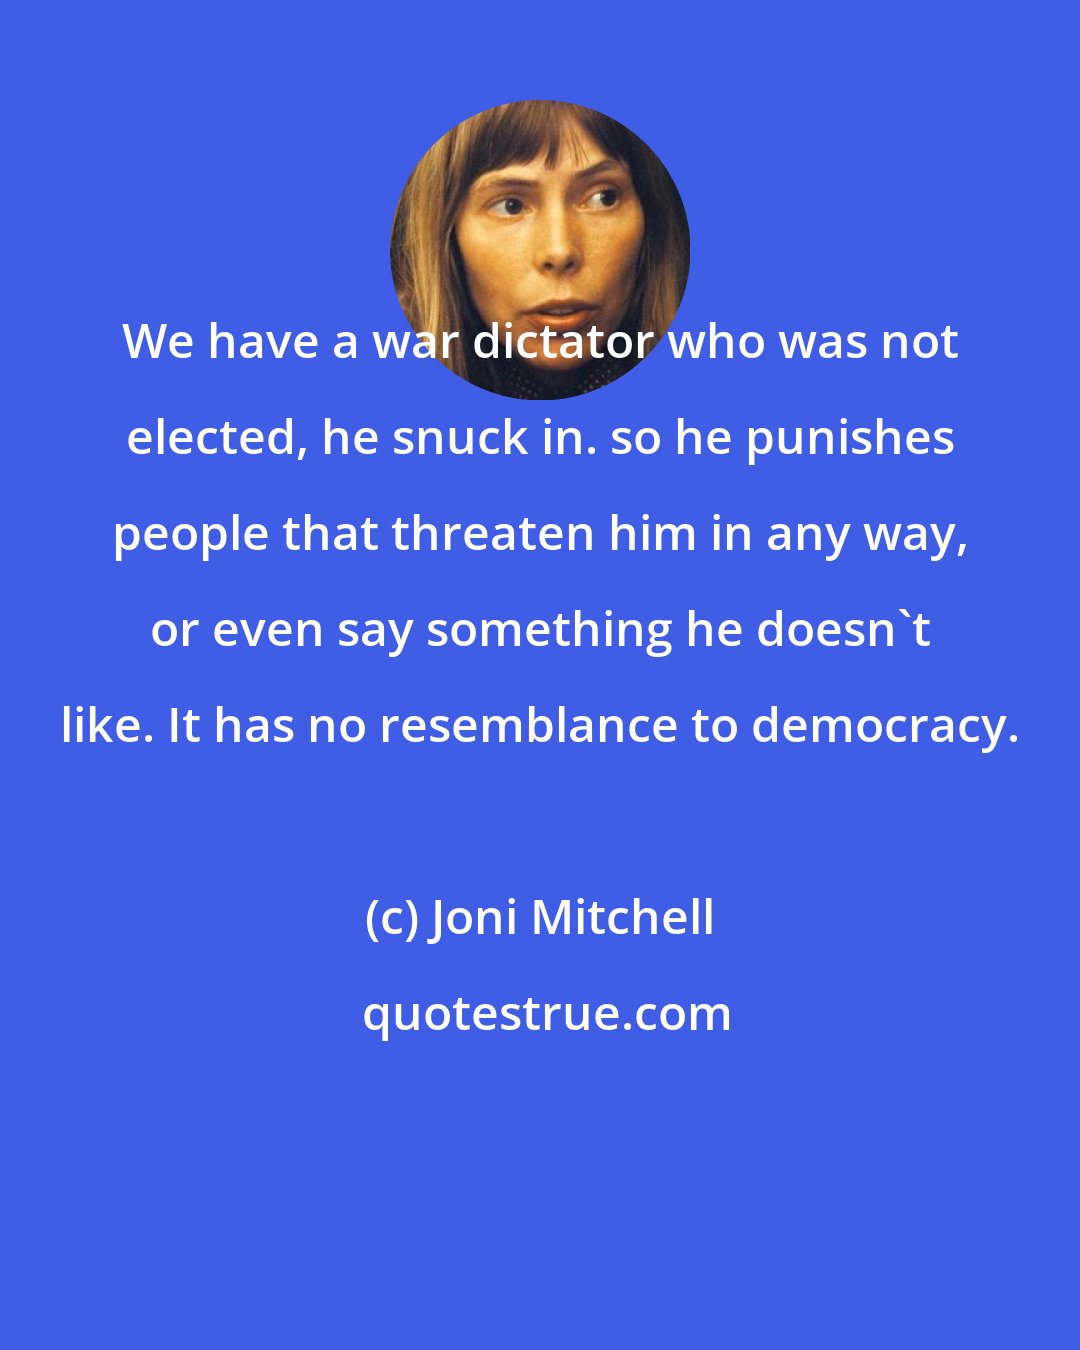 Joni Mitchell: We have a war dictator who was not elected, he snuck in. so he punishes people that threaten him in any way, or even say something he doesn't like. It has no resemblance to democracy.